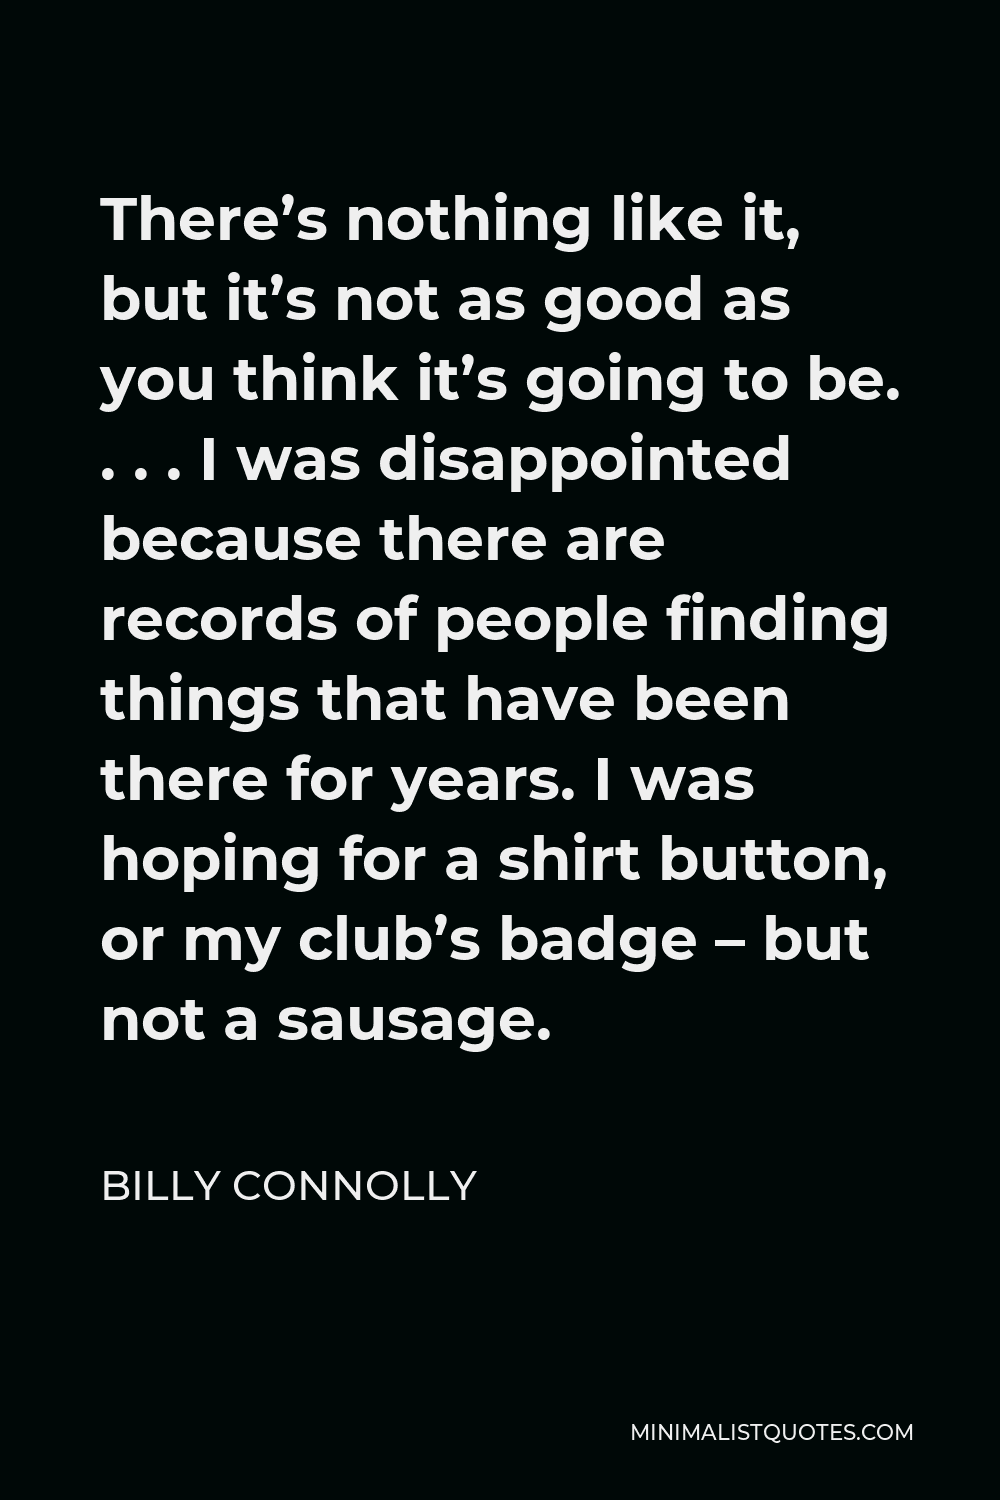 Billy Connolly Quote - There’s nothing like it, but it’s not as good as you think it’s going to be. . . . I was disappointed because there are records of people finding things that have been there for years. I was hoping for a shirt button, or my club’s badge – but not a sausage.